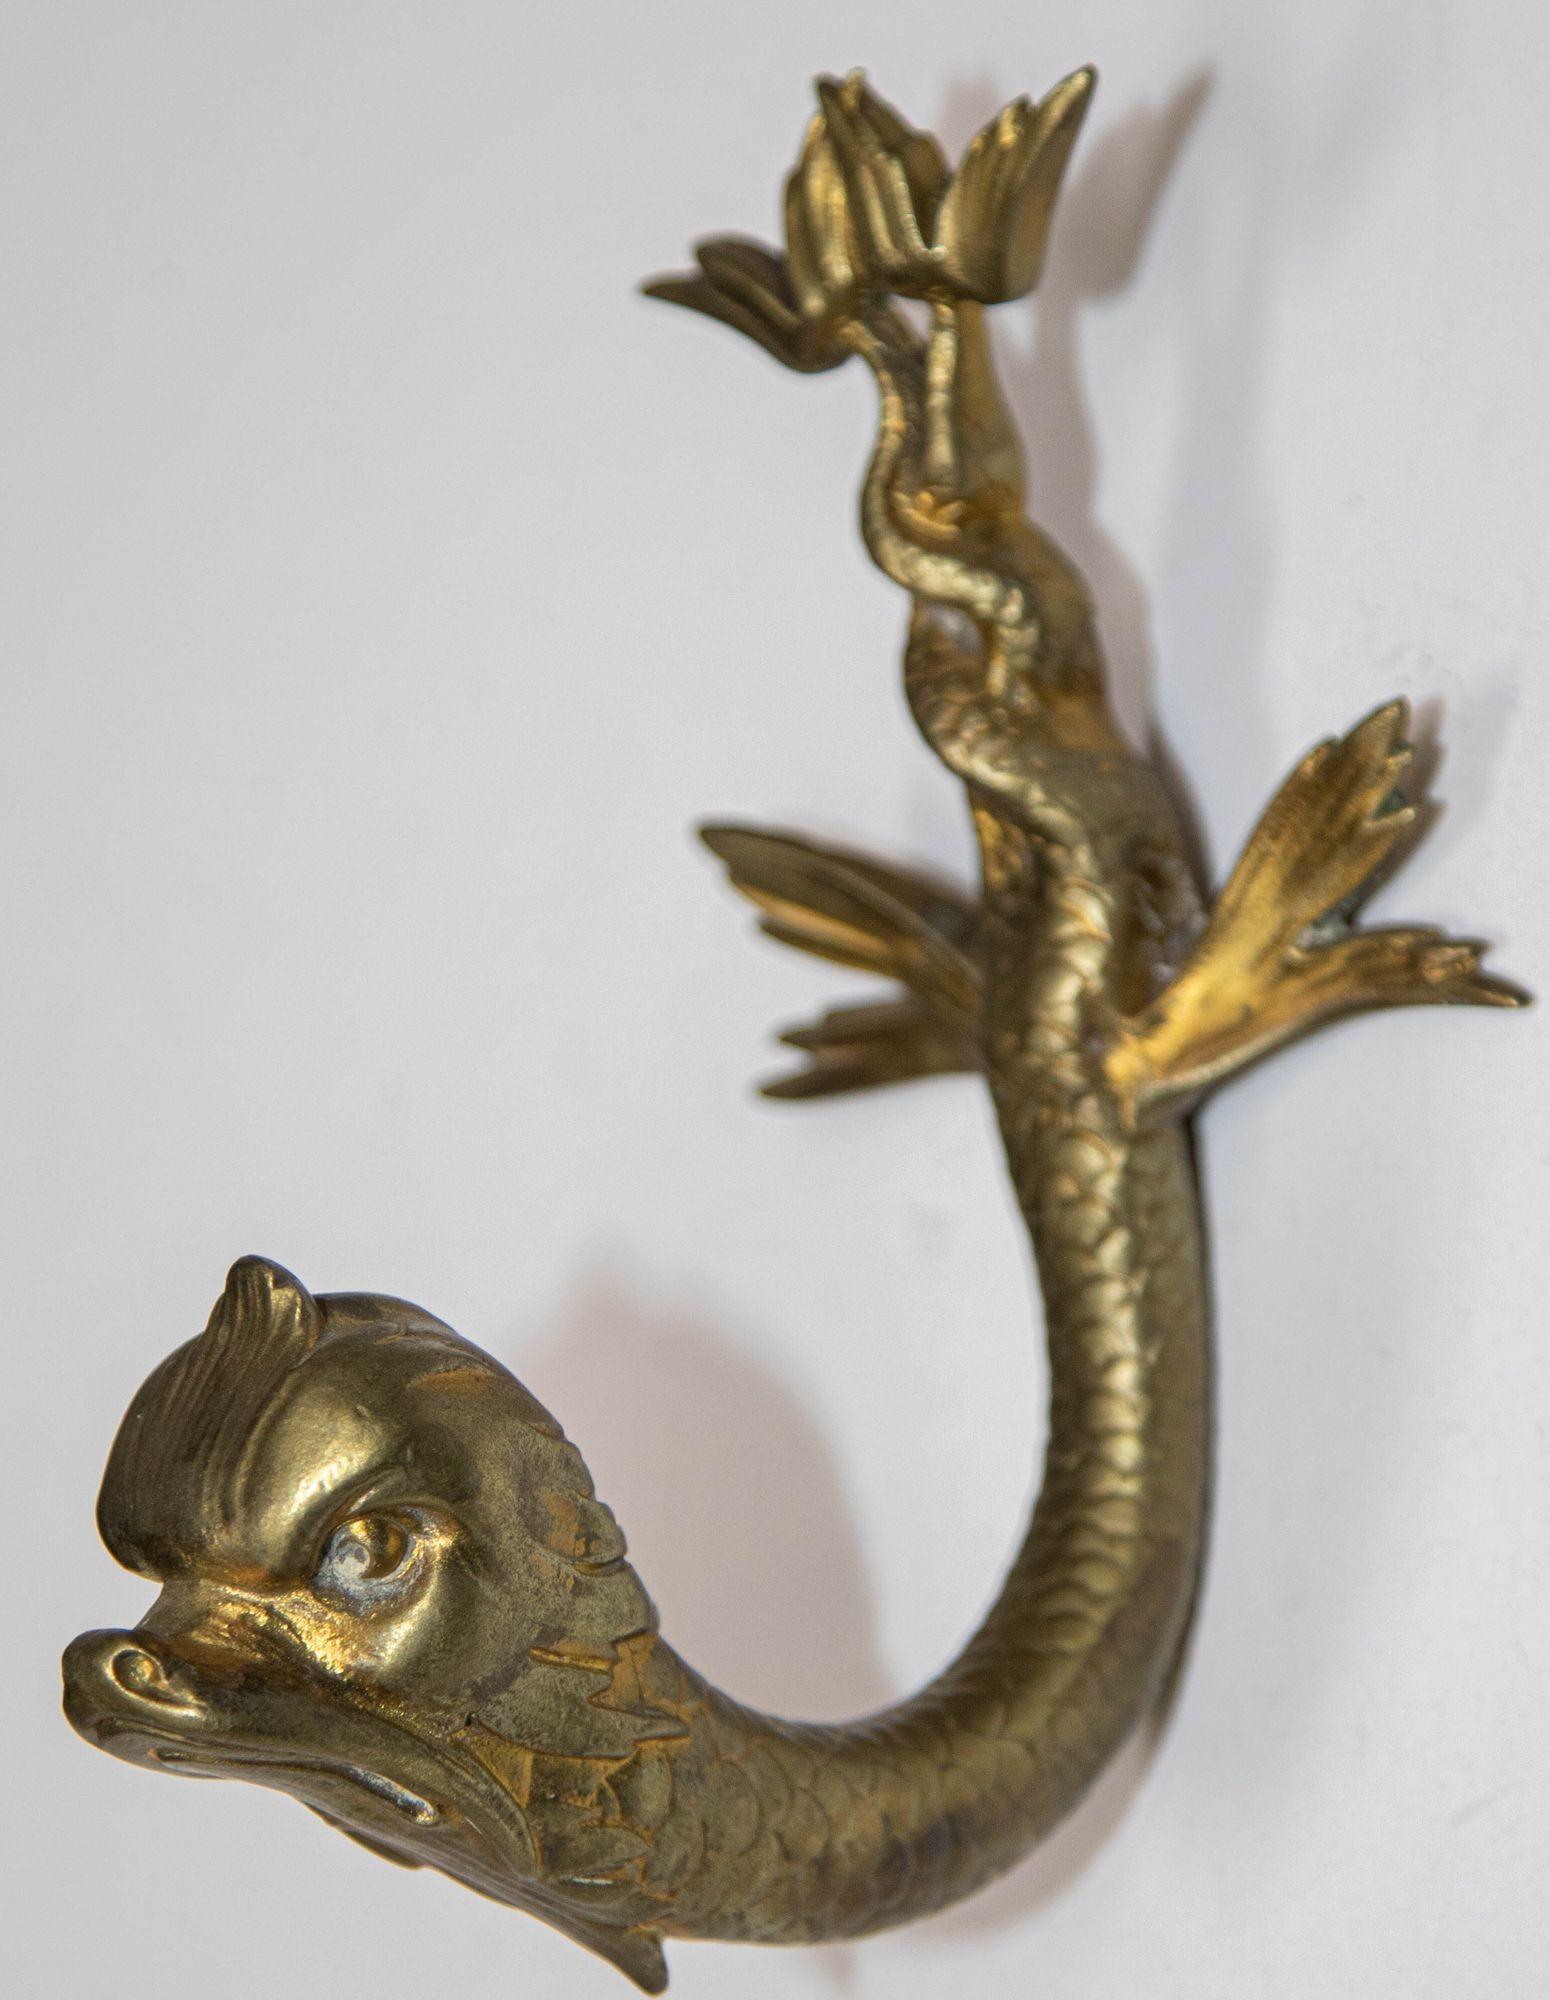 Antique Classic cast bronze koi dolphin fish wall bracket or coat hook.
Cast brass hat or coat hook in the form of a Maltese dolphin fish with a whimsical depiction of the classical mythological dolphin face with a sea serpents tail.
This French